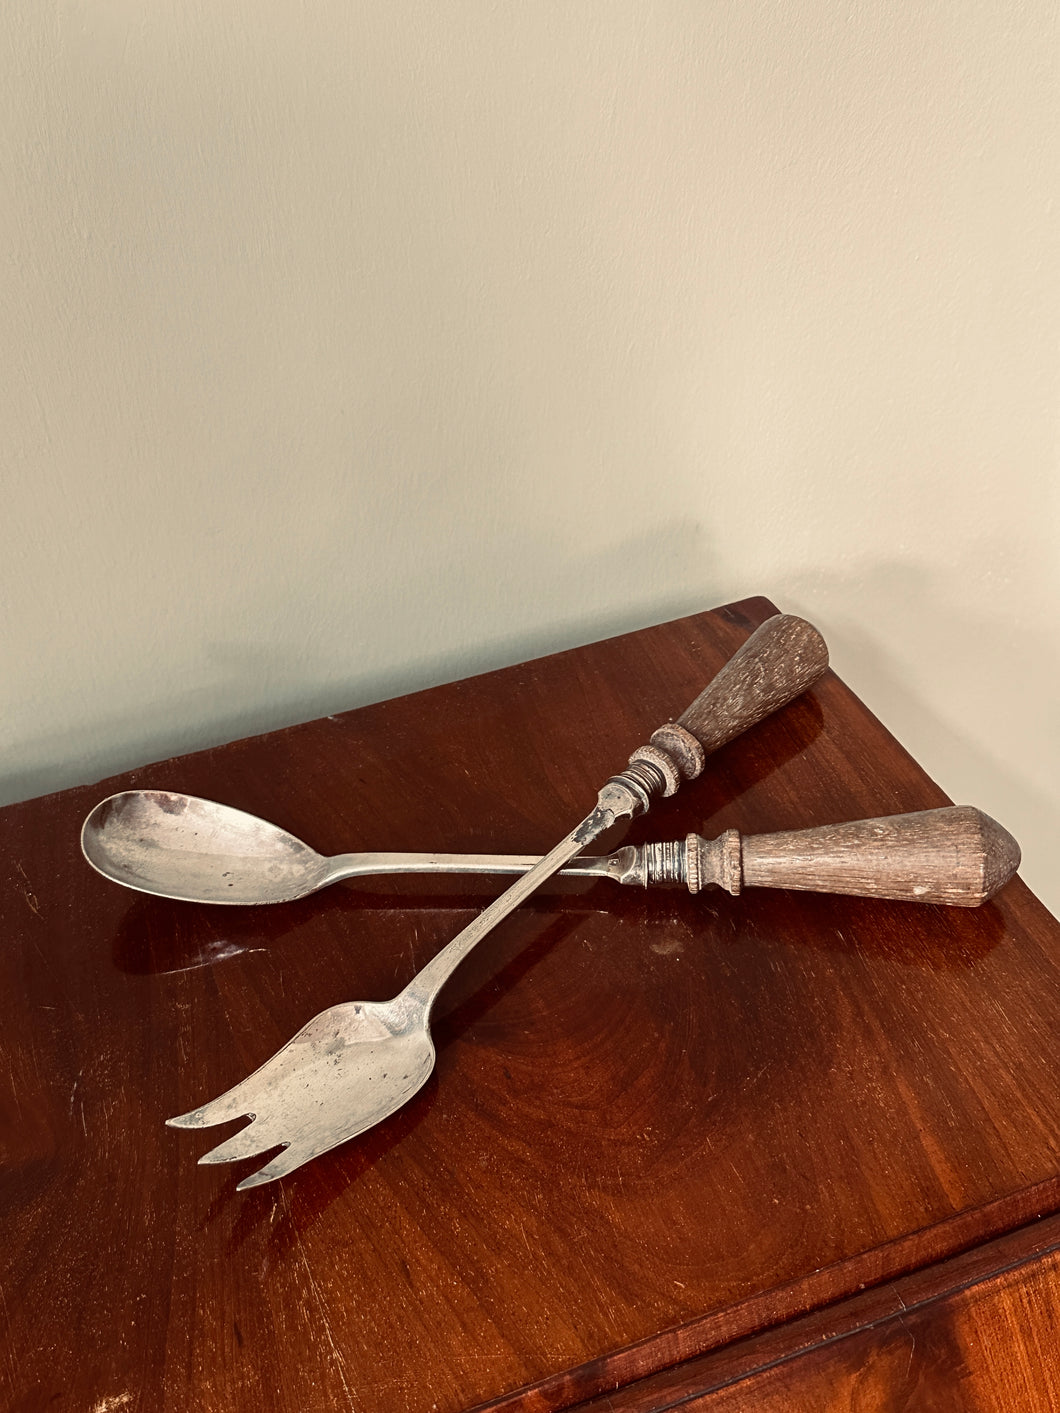 Pair of Antique Silver and Wooden Salad Servers